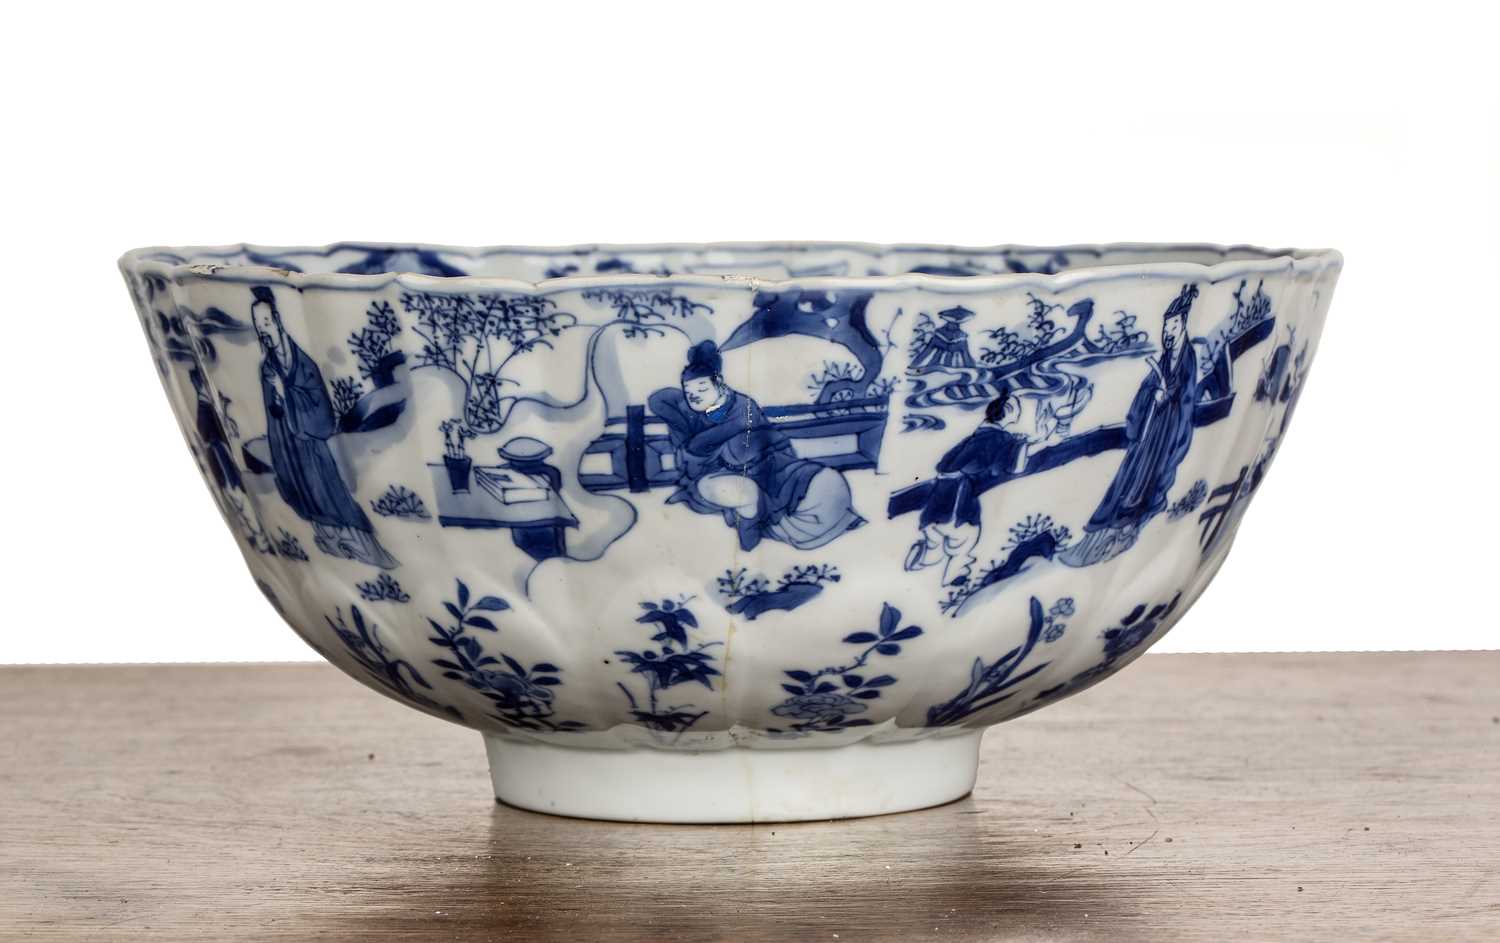 Lot 2 - Blue and white fluted porcelain bowl Chinese,...